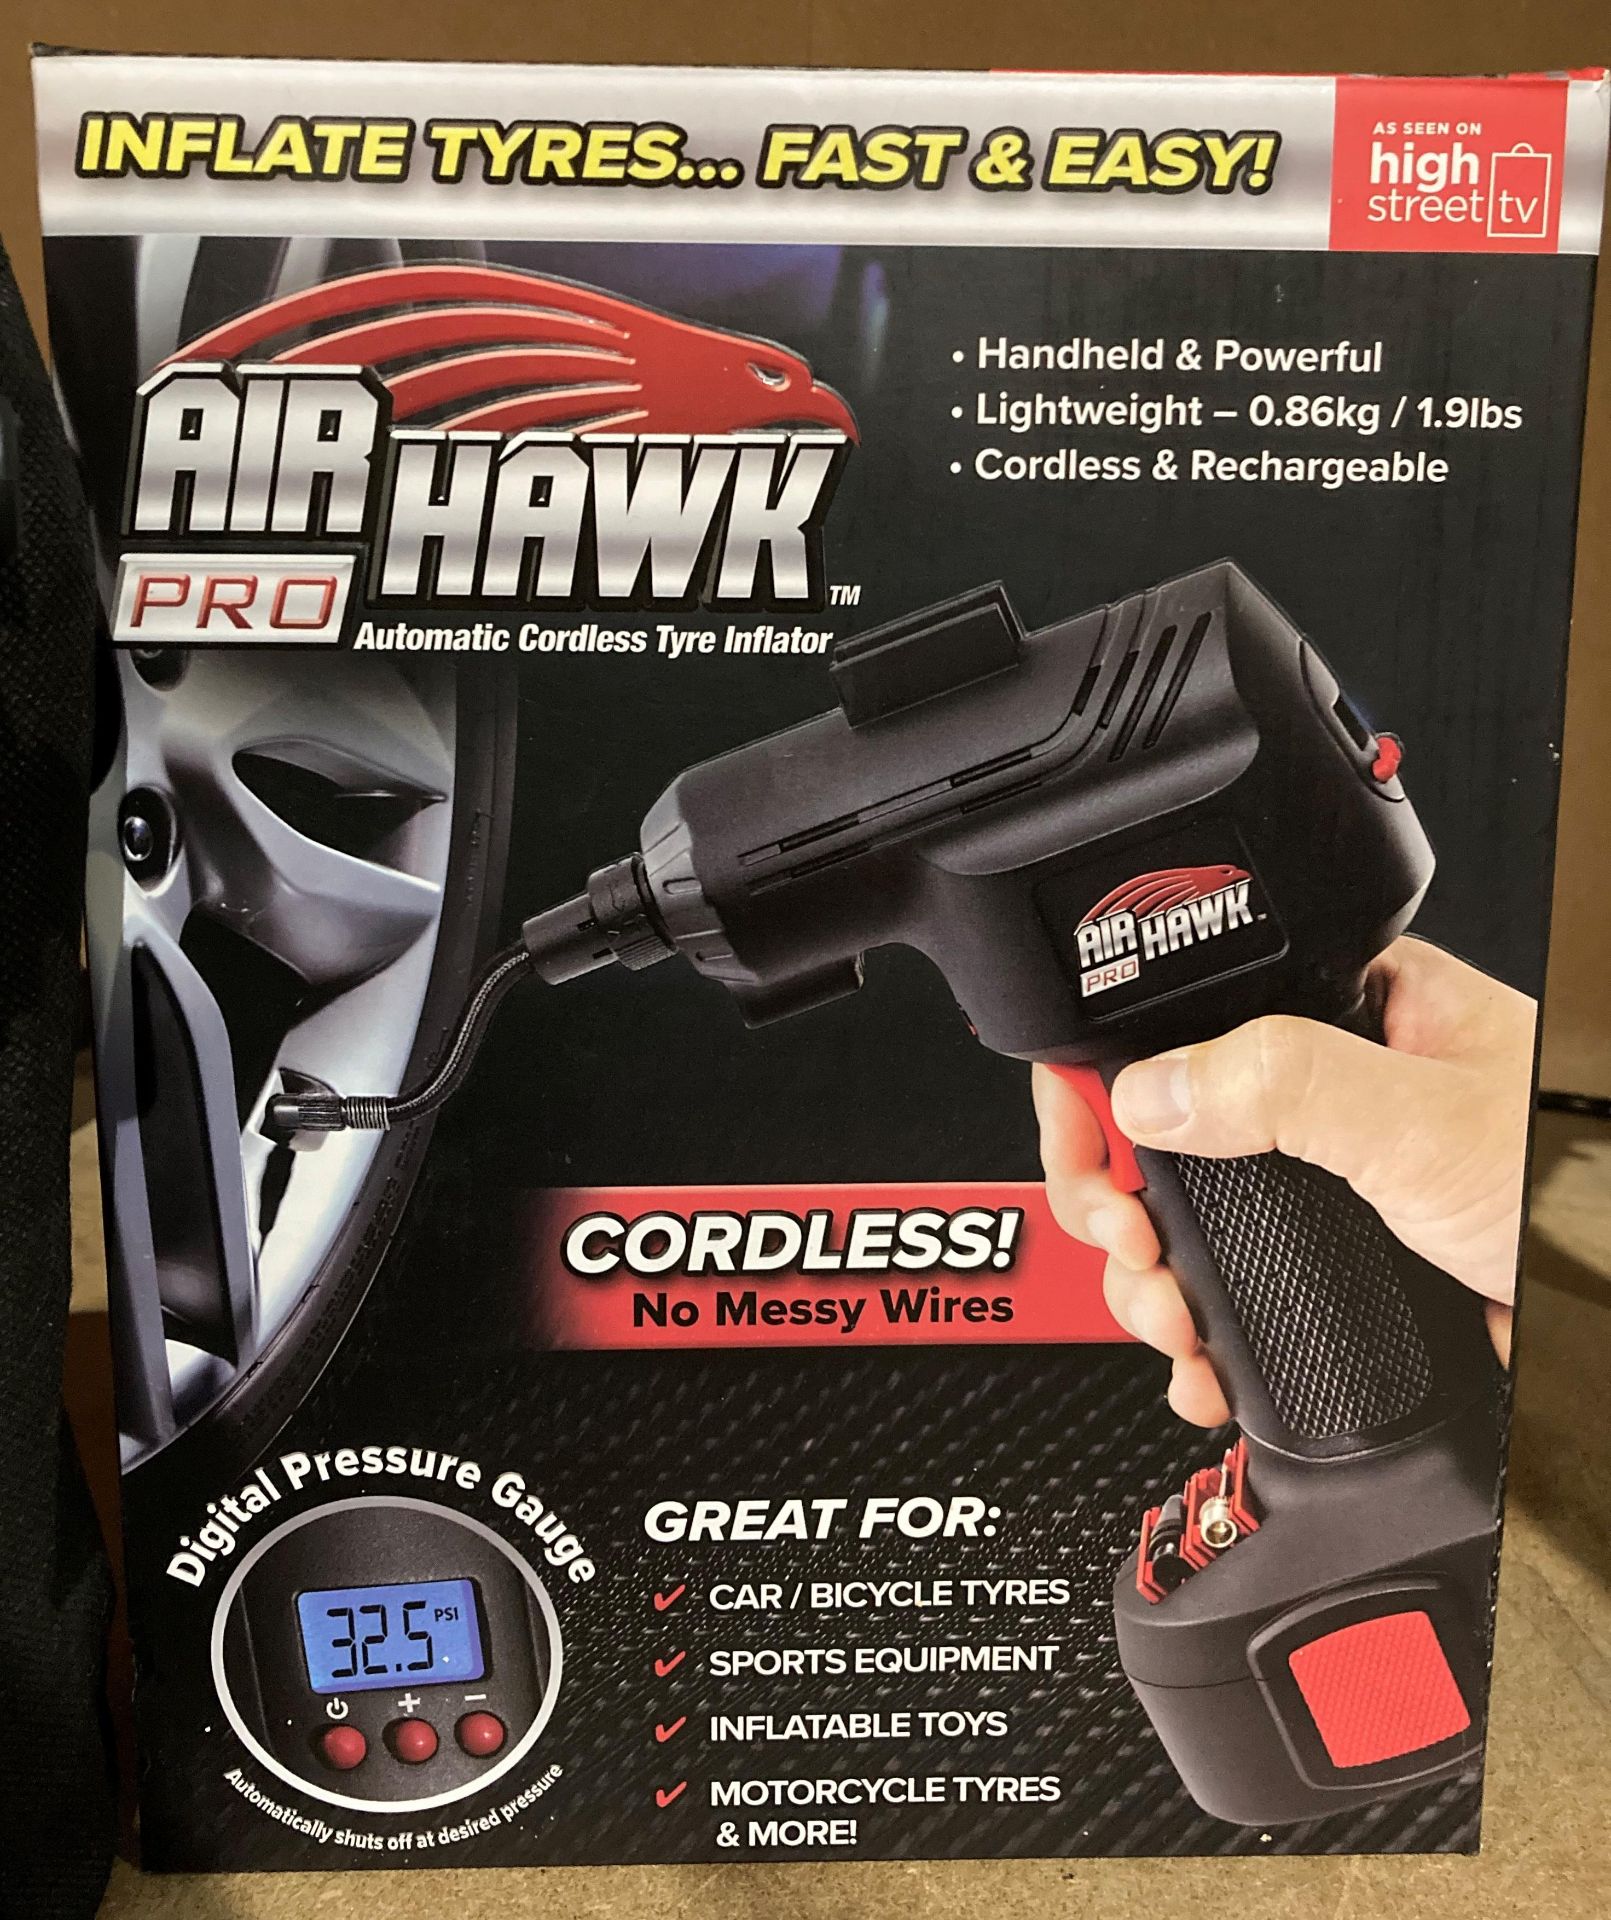 An Air Hawk Pro automatic cordless tyre inflator - Image 2 of 2